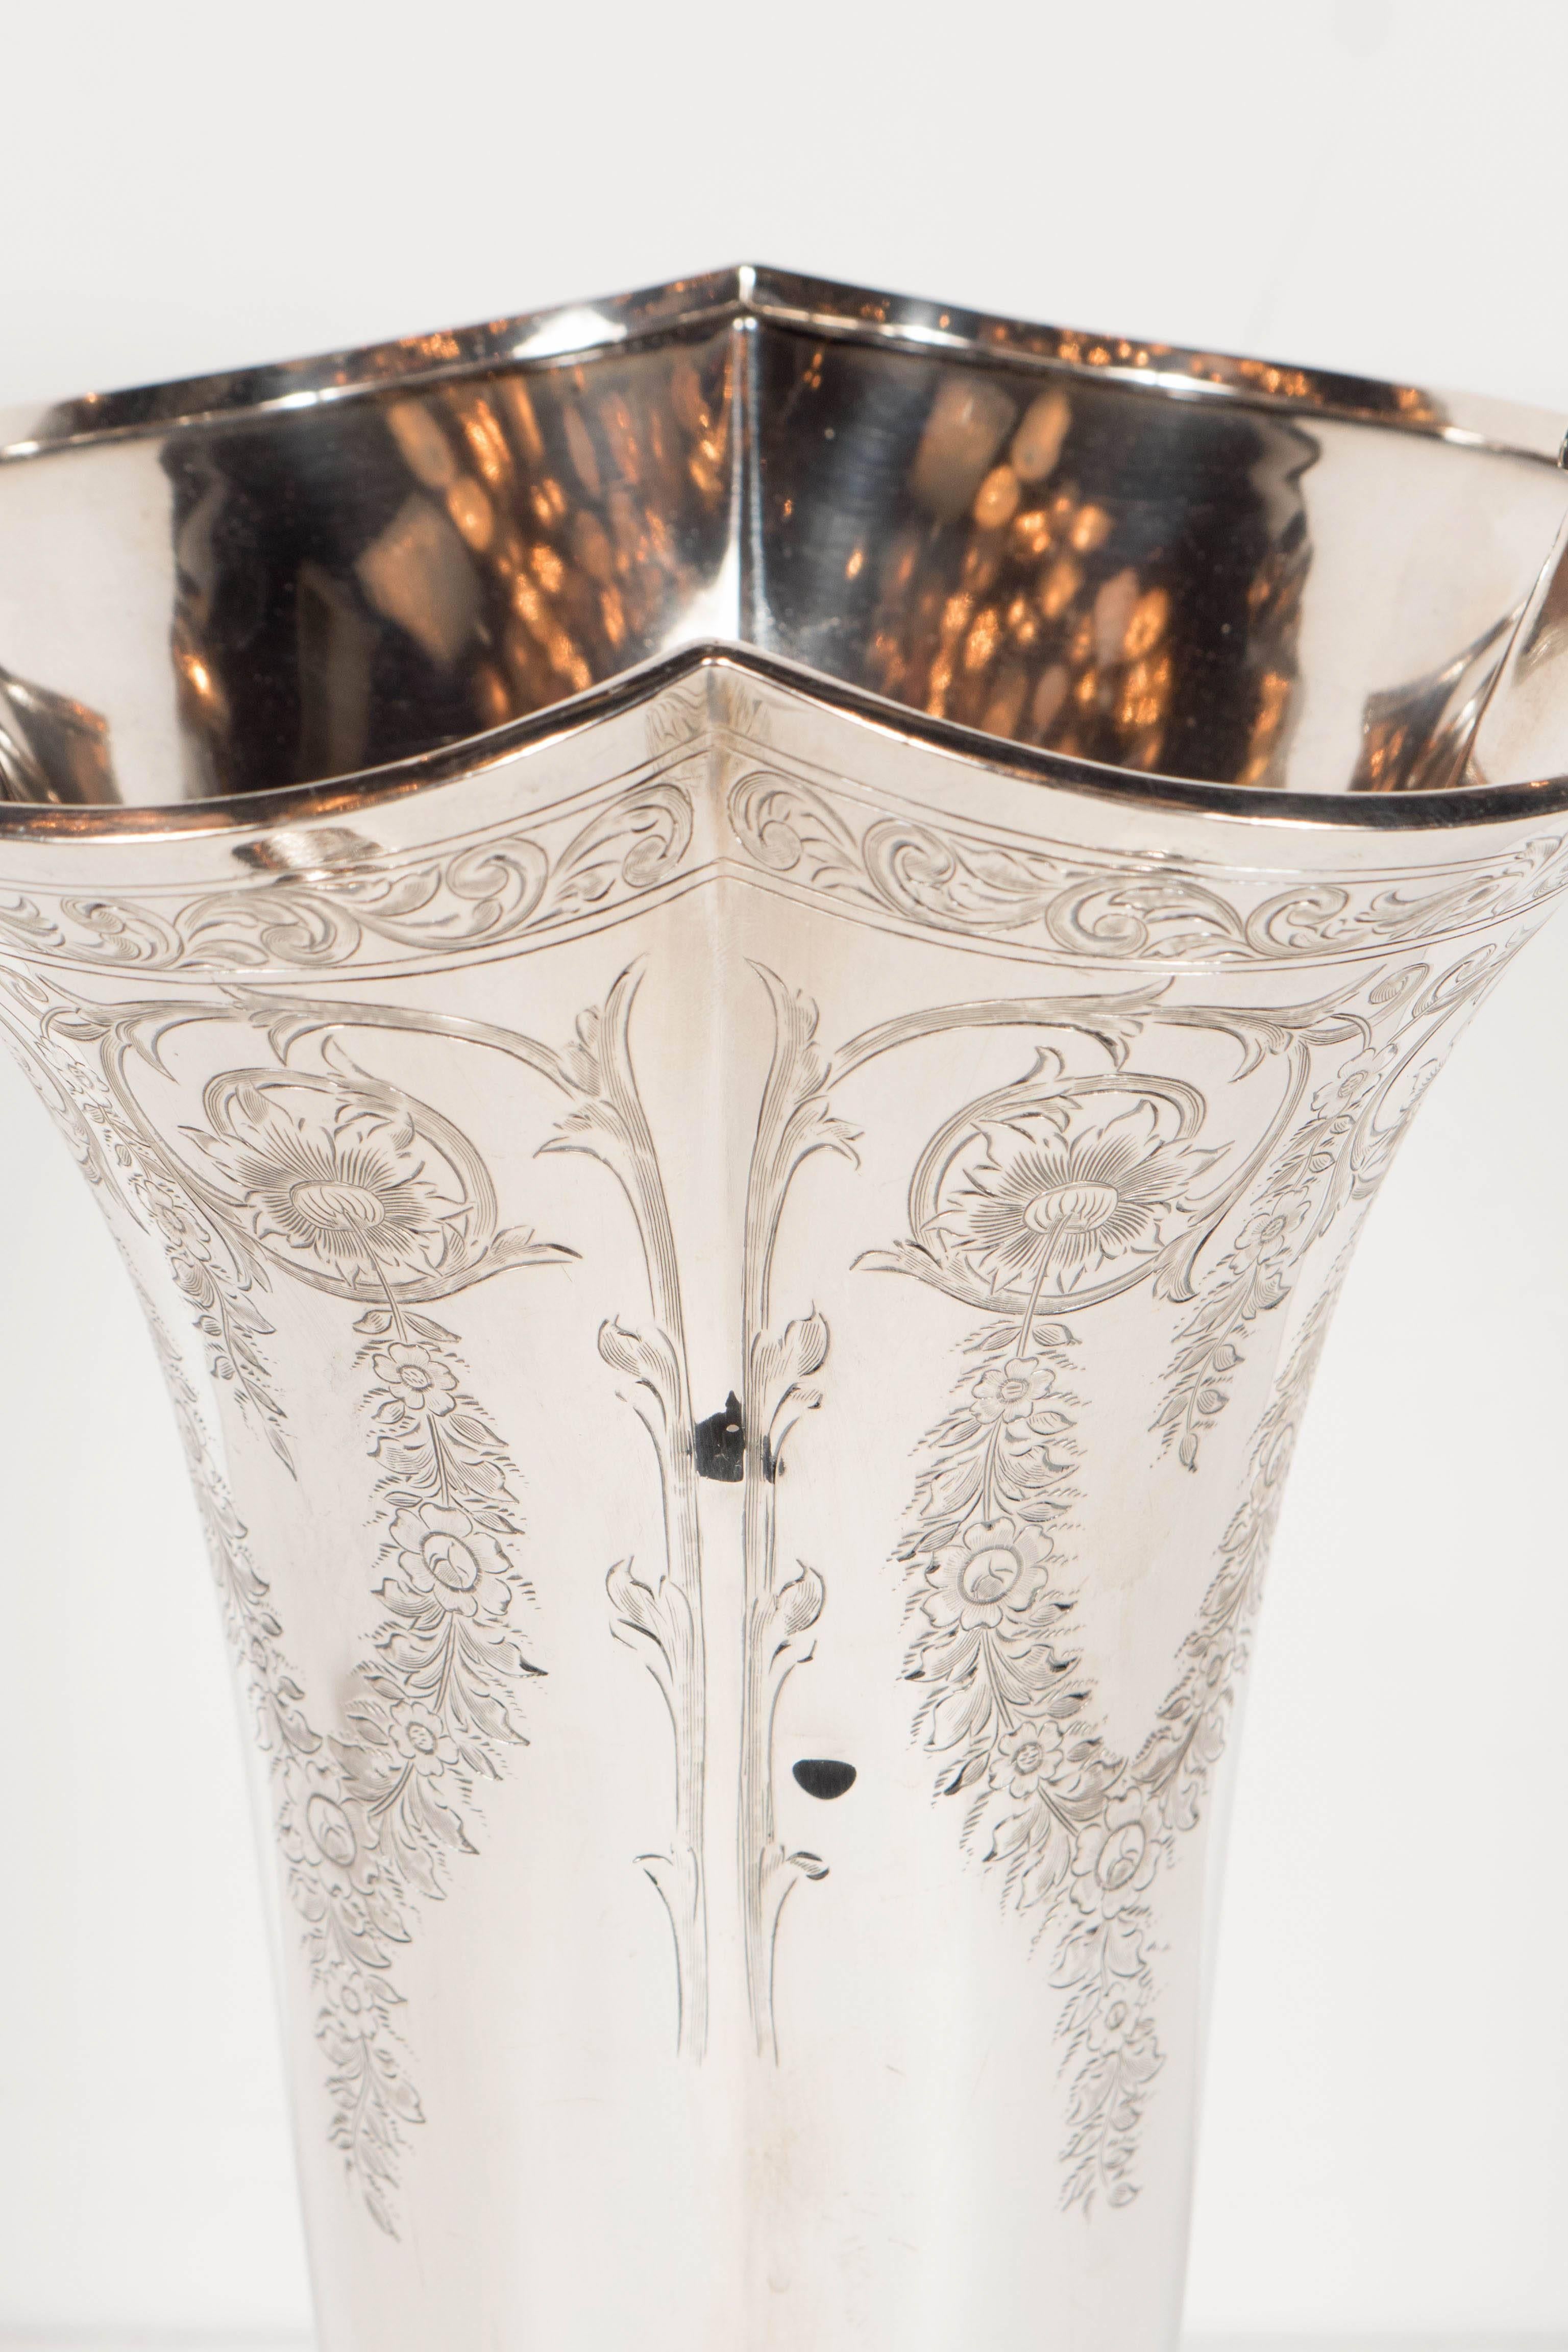 Magnificent Edwardian Trumpet Vase in Sterling Silver by Howard and Co. 4